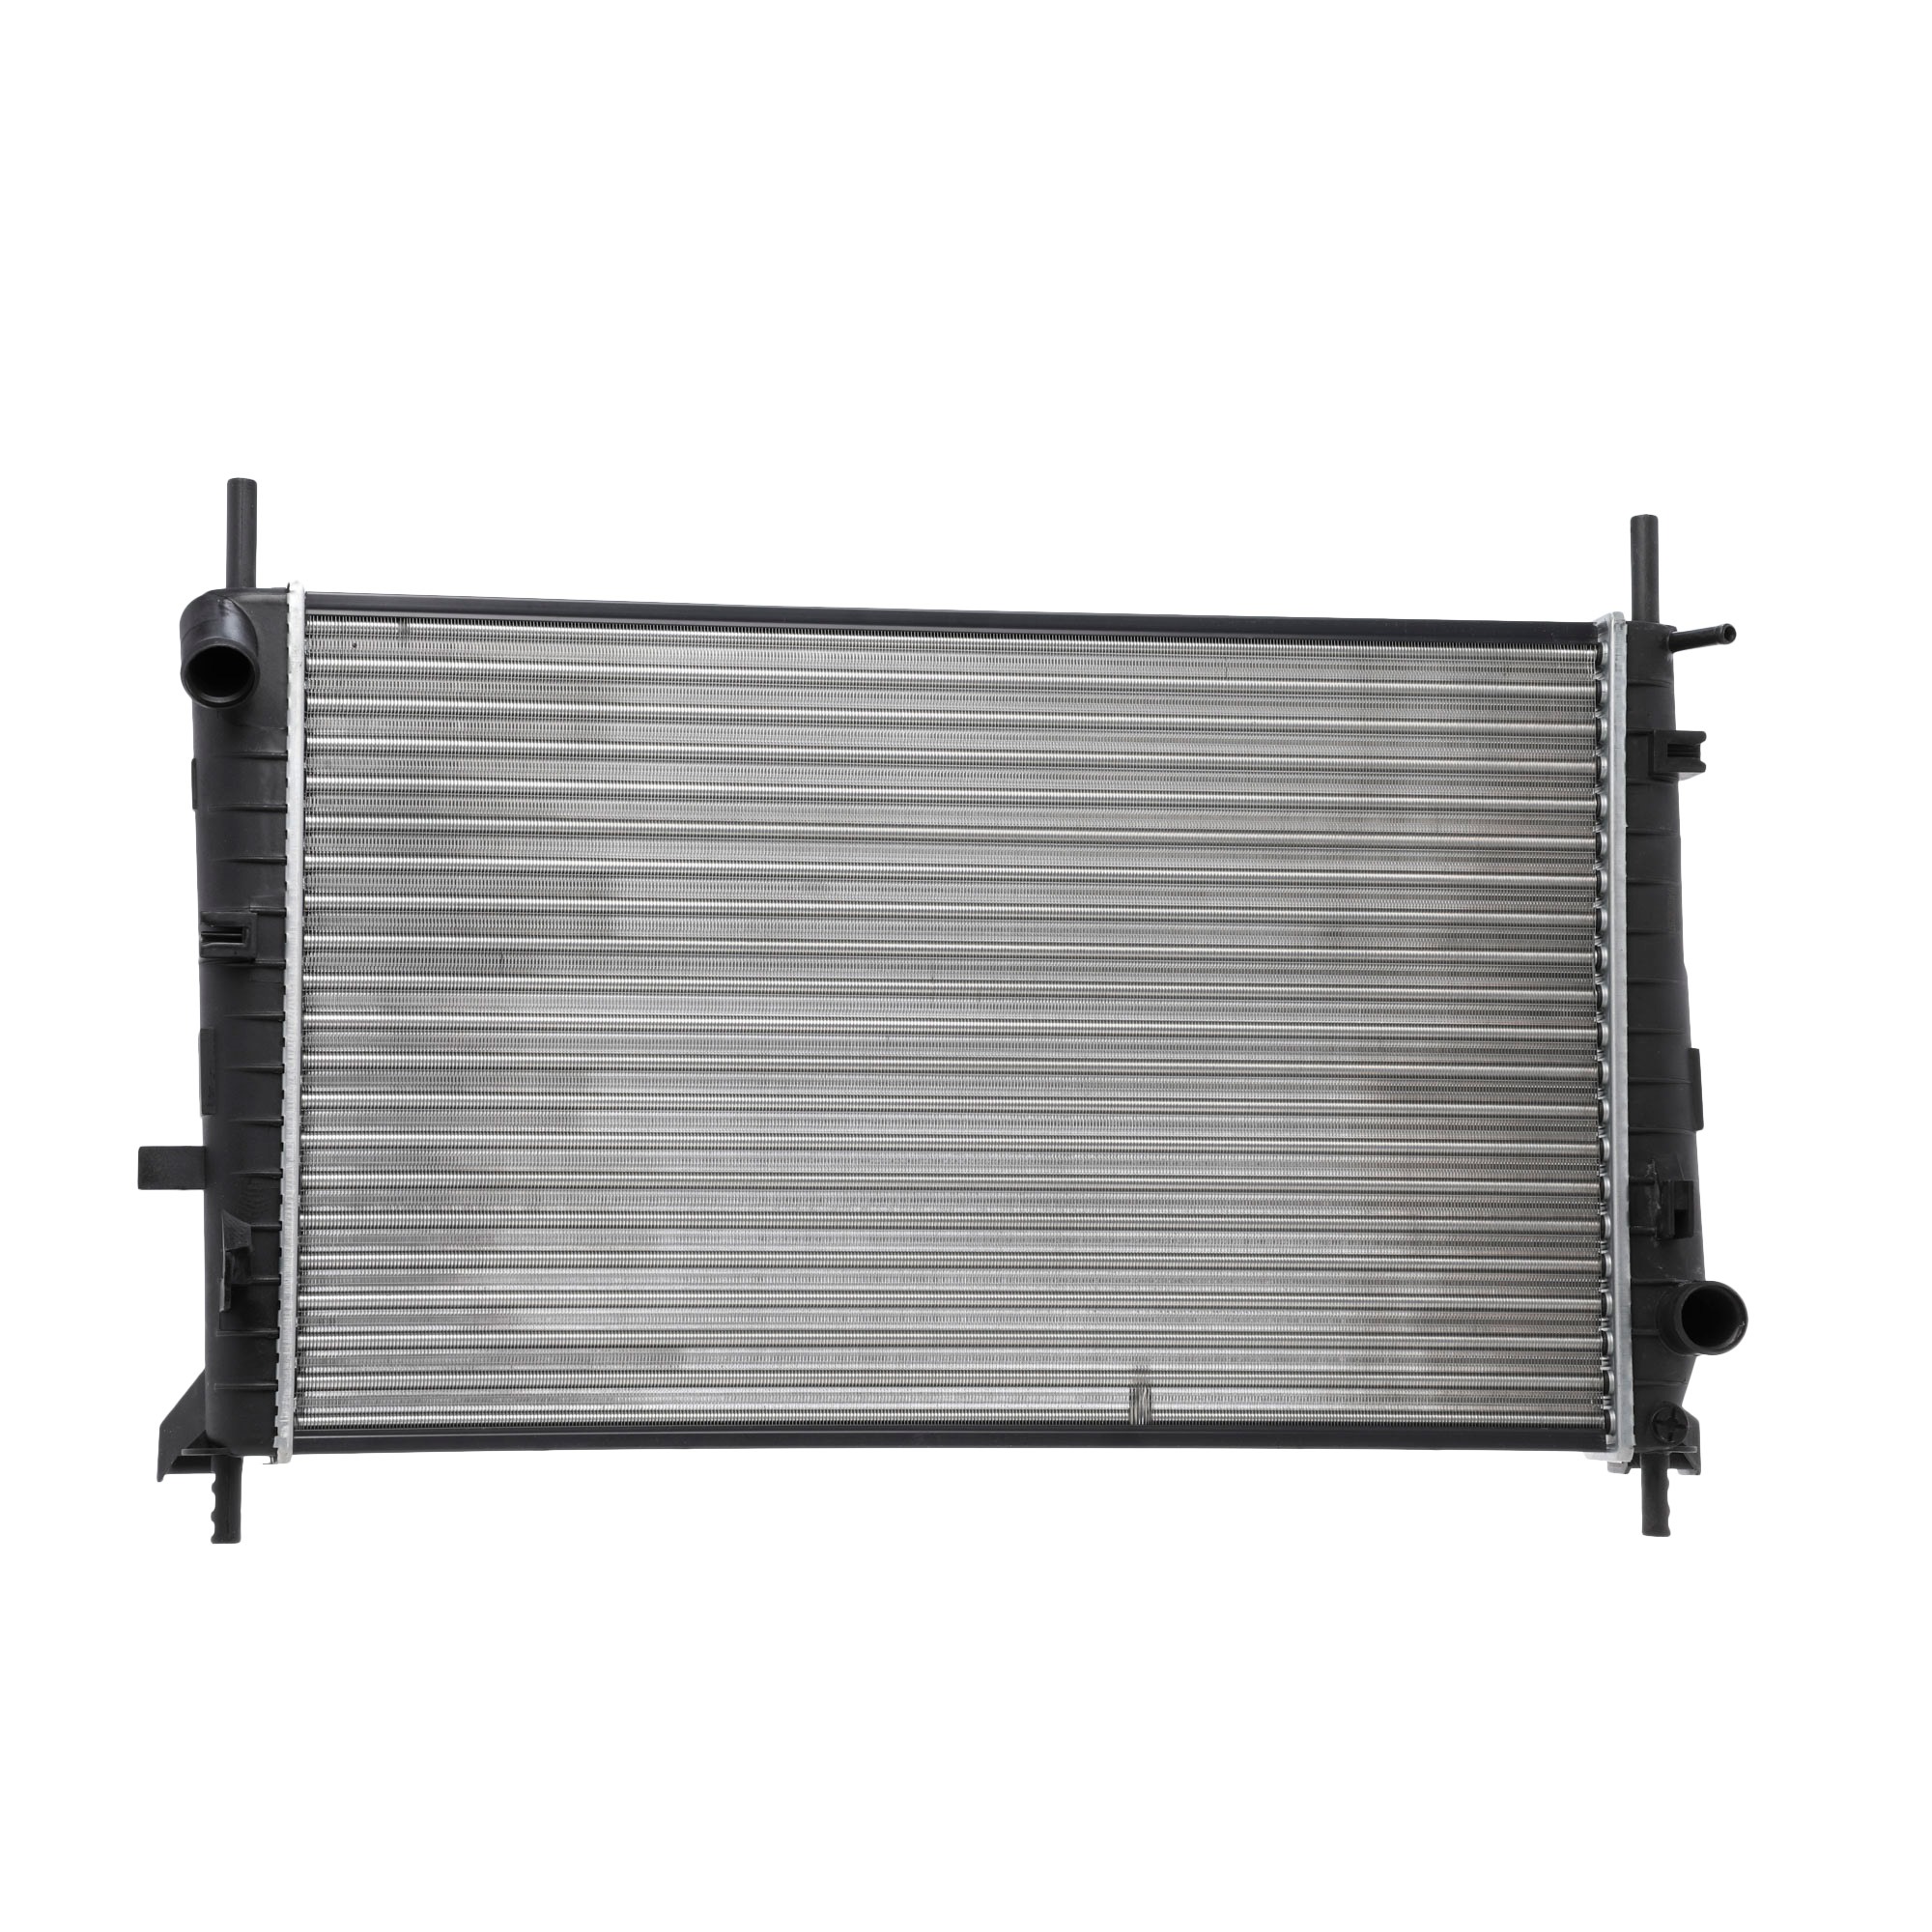 STARK SKRD-0120477 Engine radiator Aluminium, Plastic, for vehicles with/without air conditioning, Manual Transmission